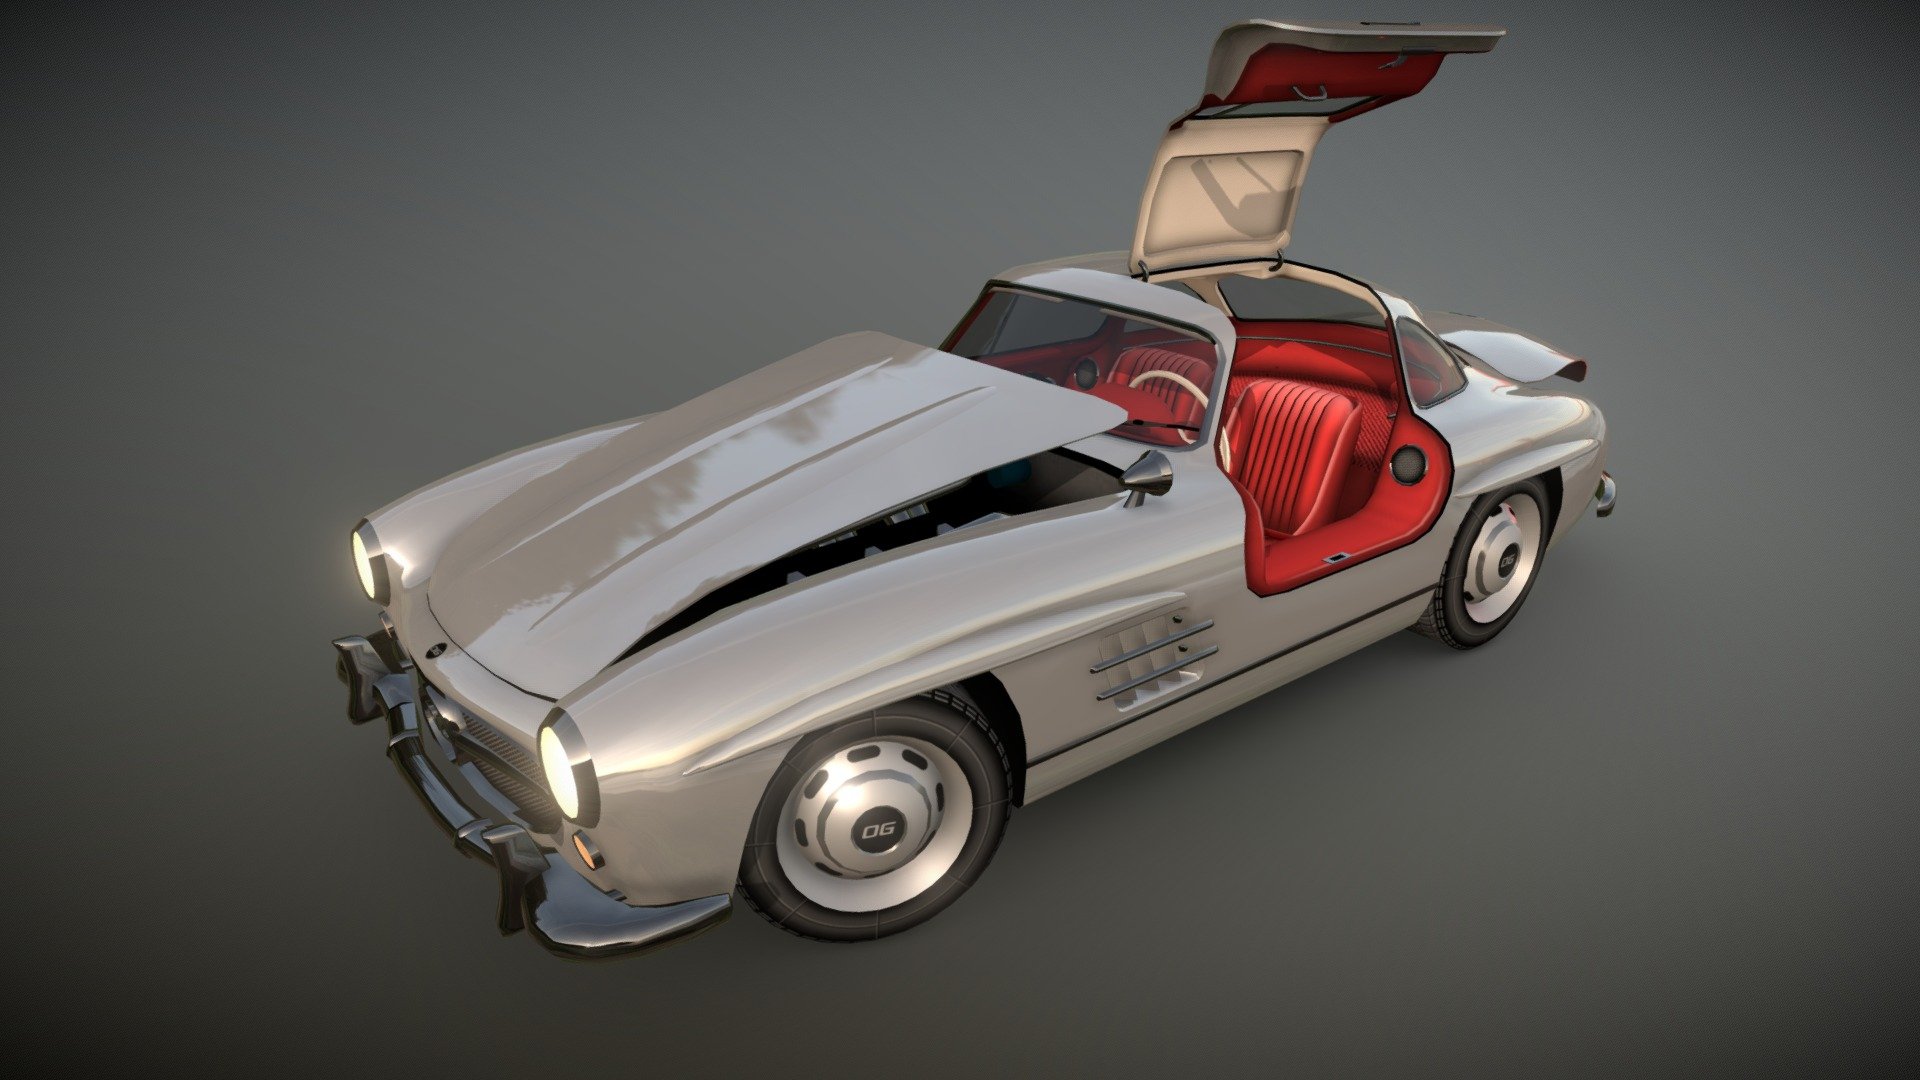 Low poly model for mobile game with interrior and moving parts
22 objects
13.8k verts
23k triangles
13.6k polygons
Textures 256x256 to 2048x2048
Created in blender3d 2022, Photoshop 2022 - Mercedes 300SL - 3D model by OG Cars (@zigzag977010) 3d model